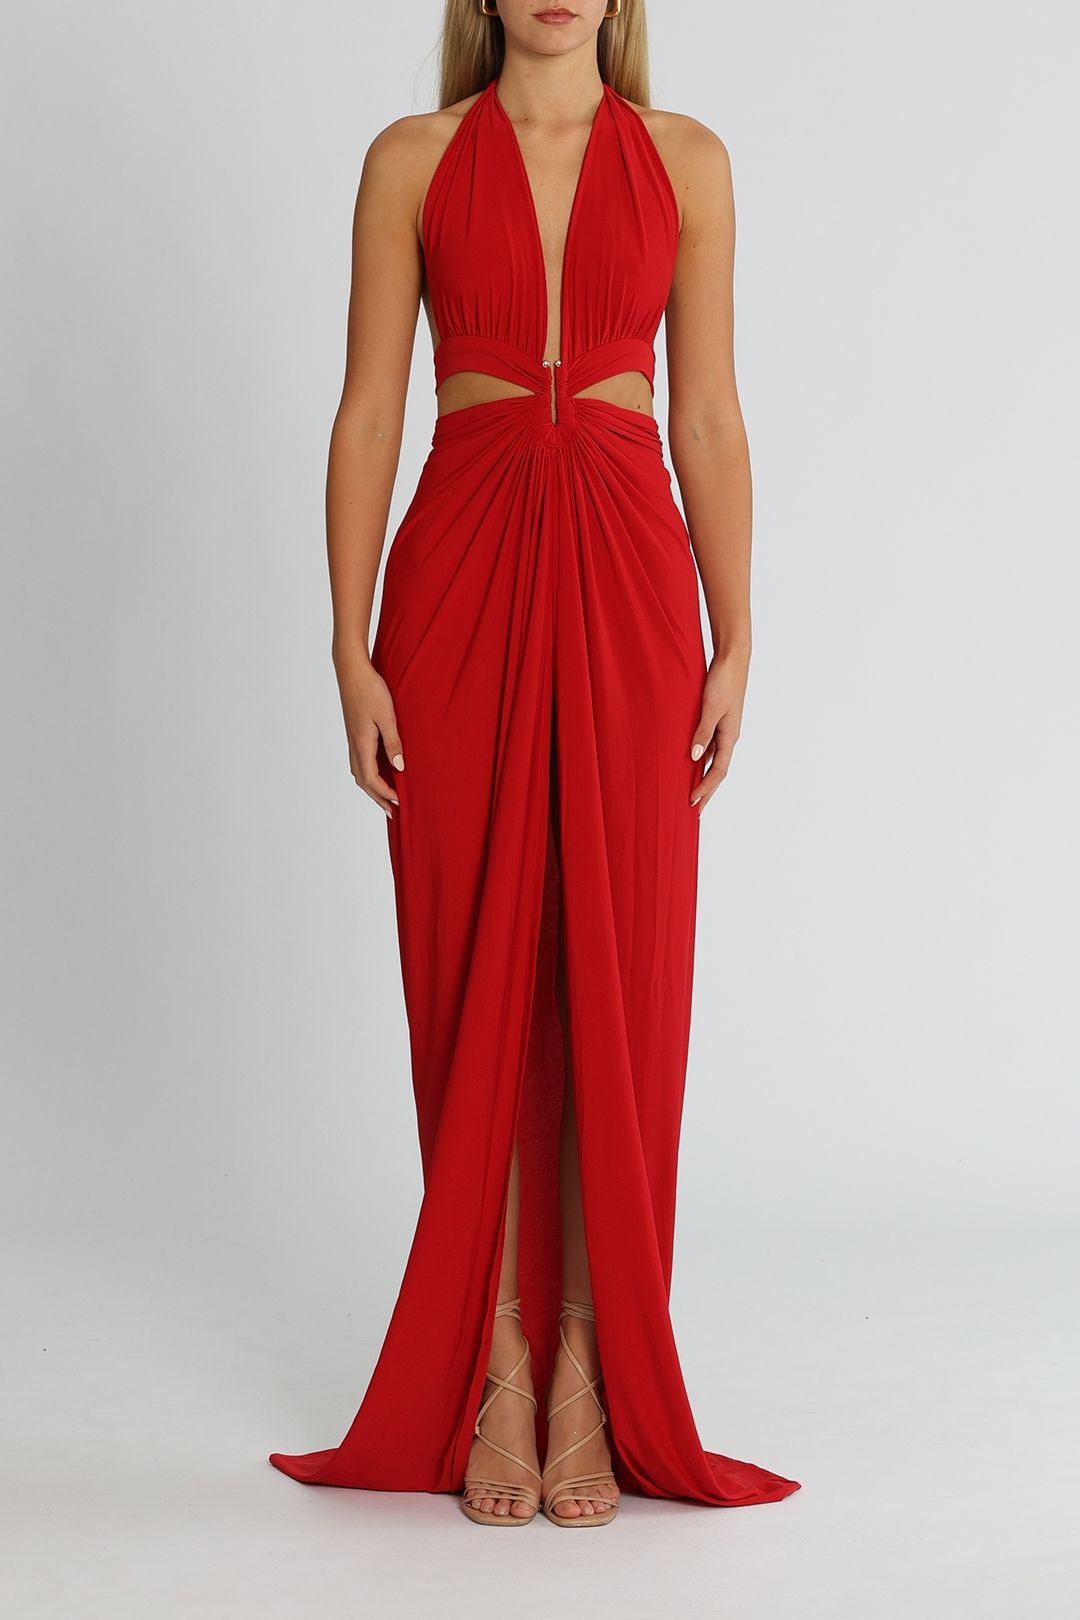 J. Angelique Tori Gown Red